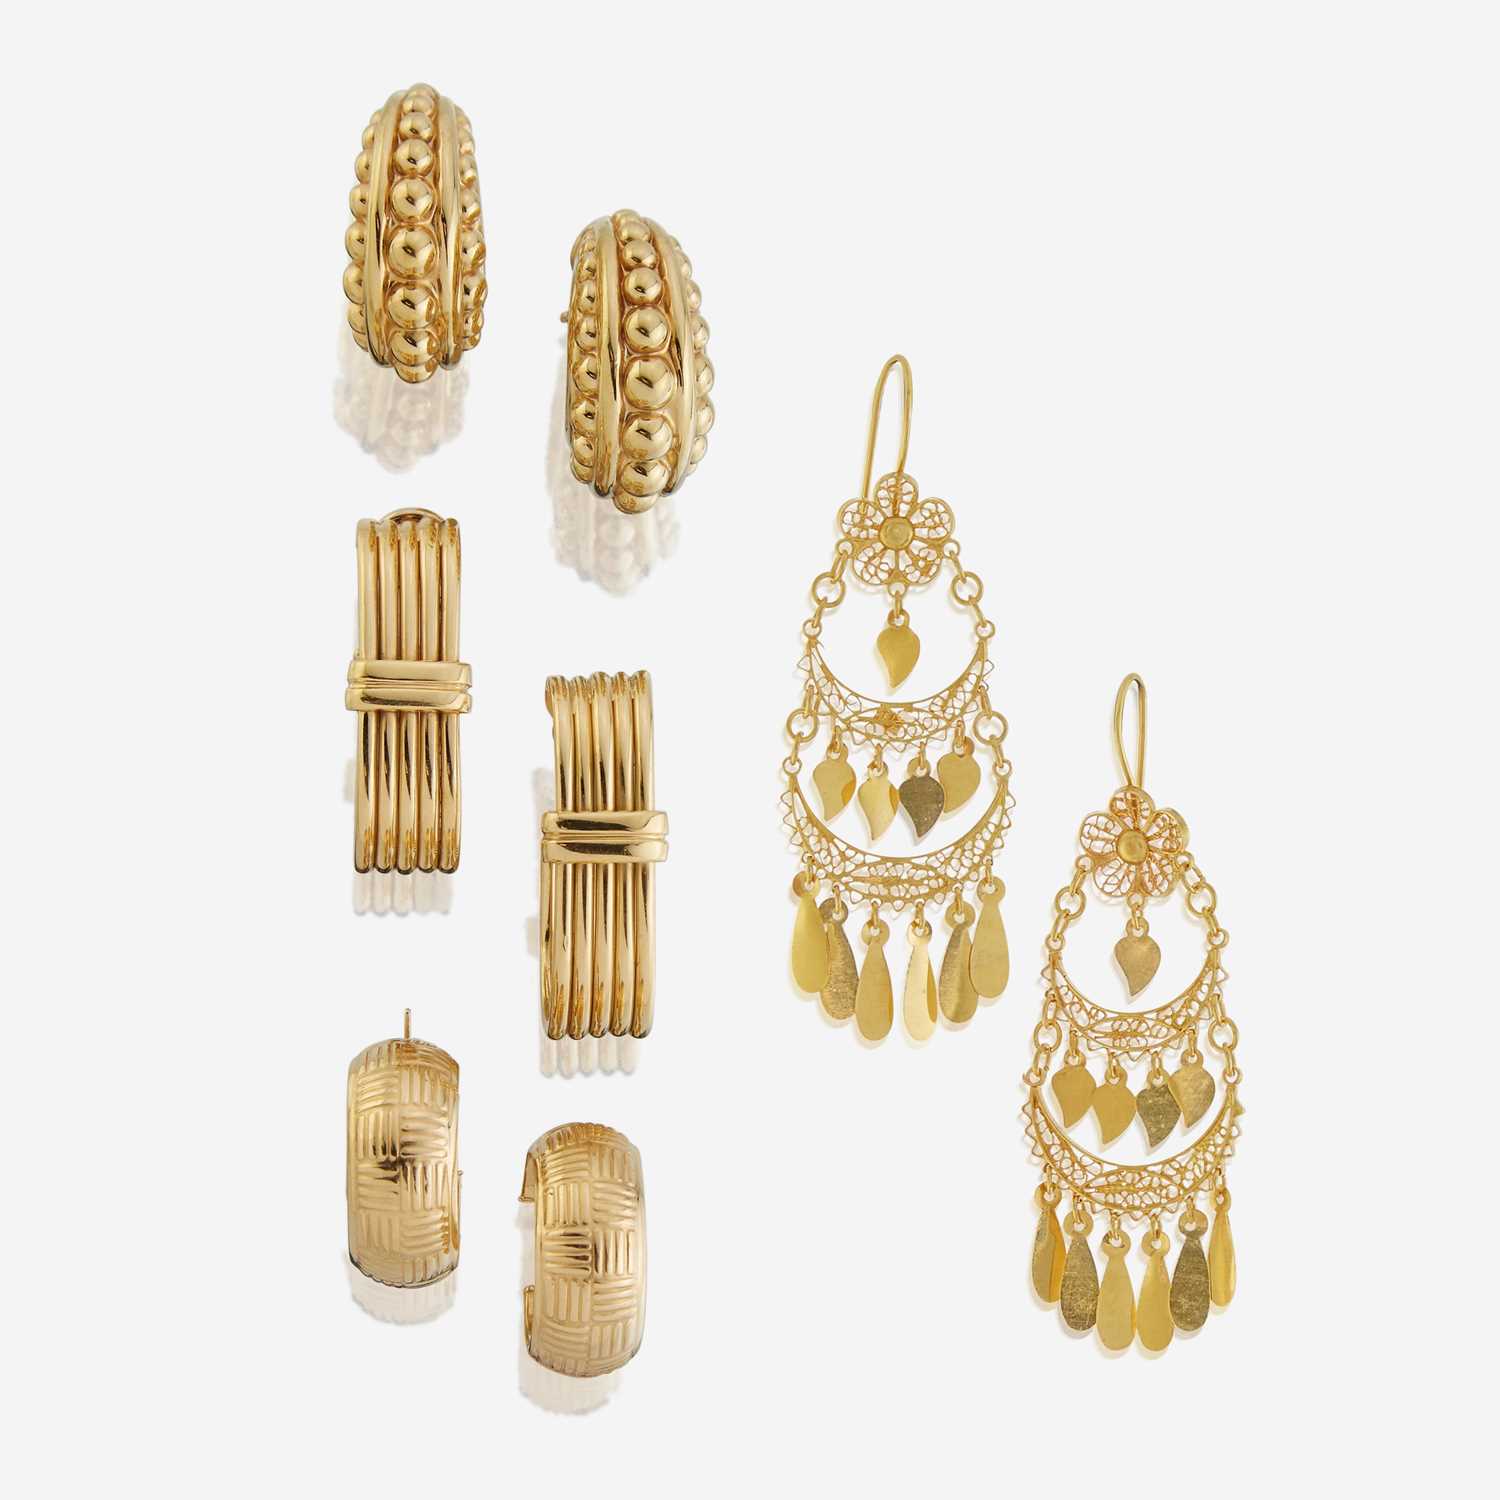 Lot 89 - A collection of four pairs of eighteen karat gold earrings